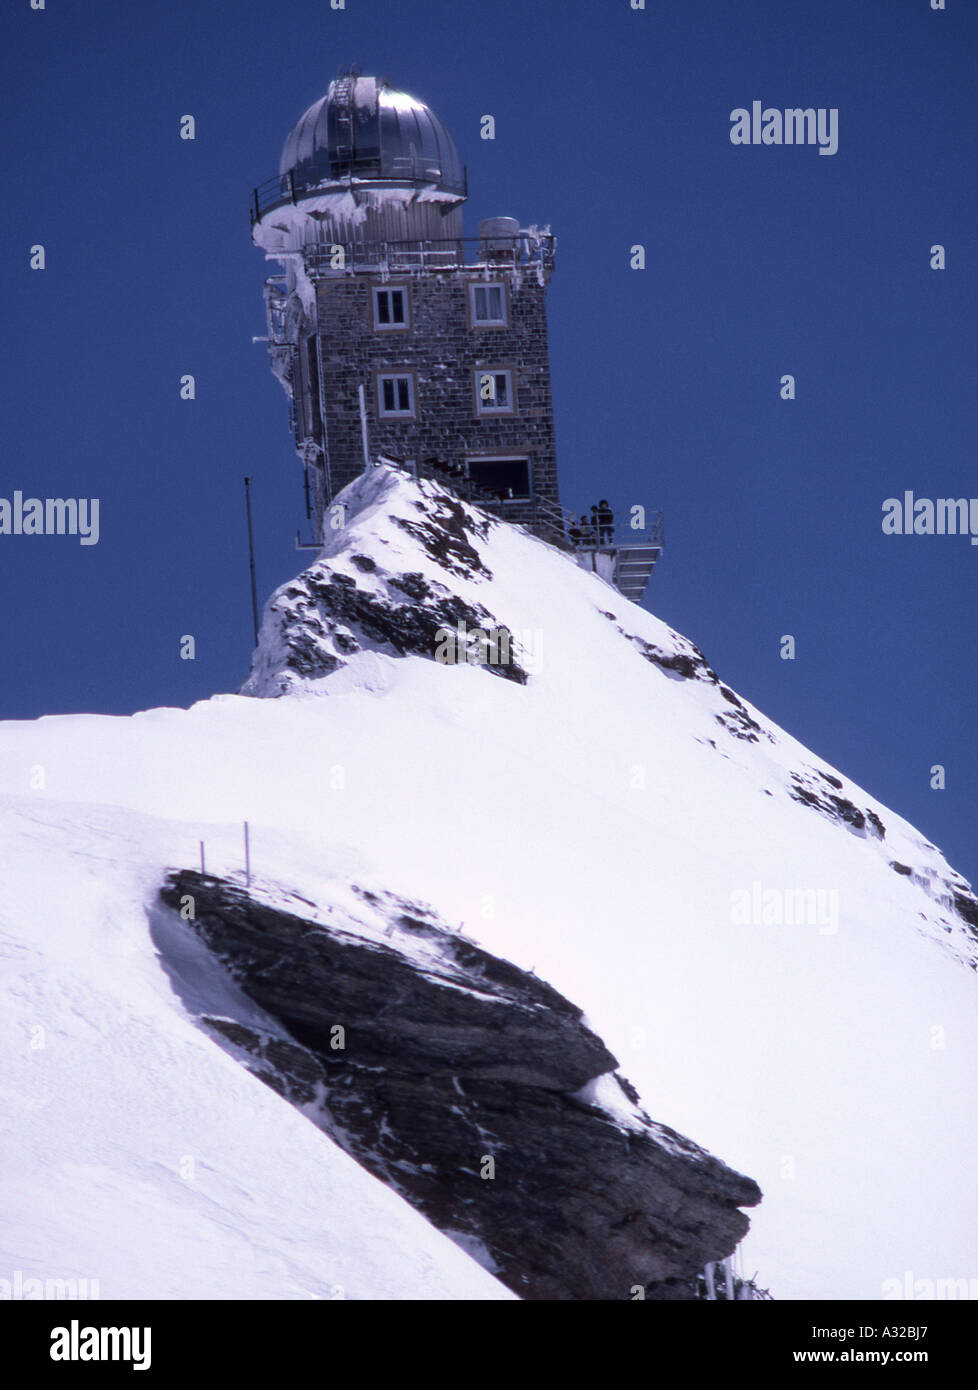 Sphinx weather station and Meteorological Observatory at Jungfraujoch,  Switzerland Stock Photo - Alamy